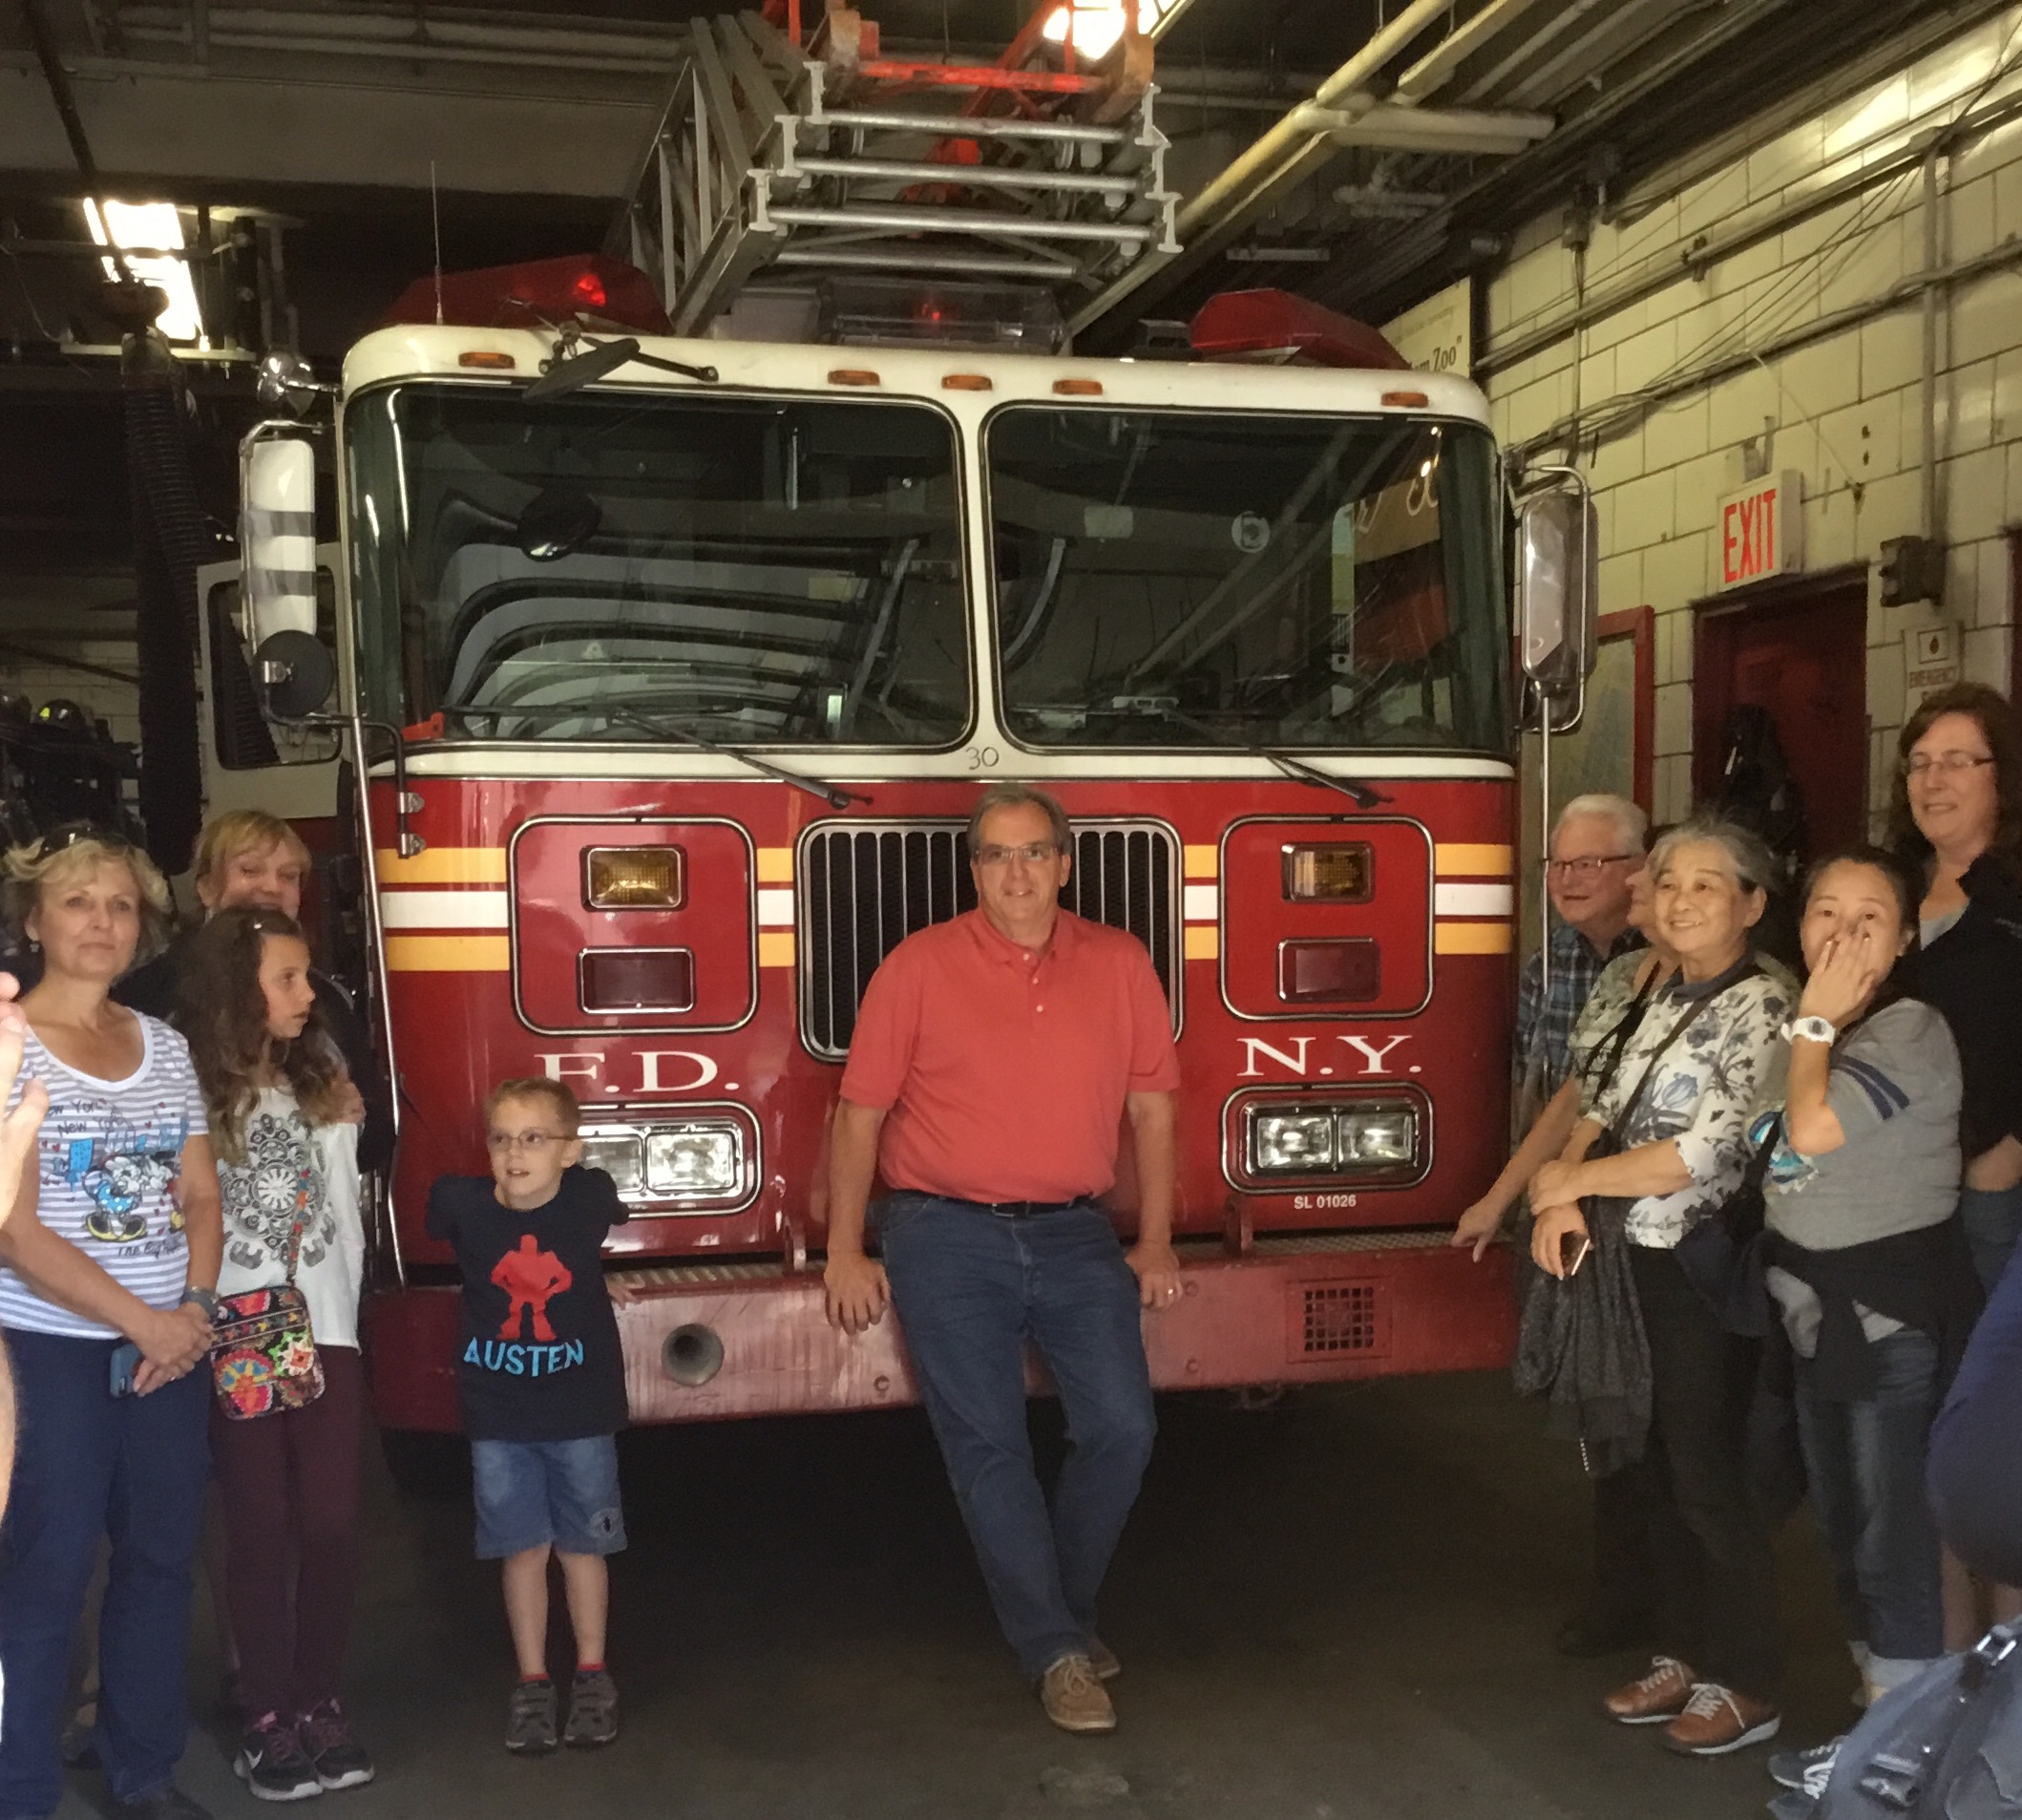 Fire Chief from Chicago visits firehouse in Harlem.